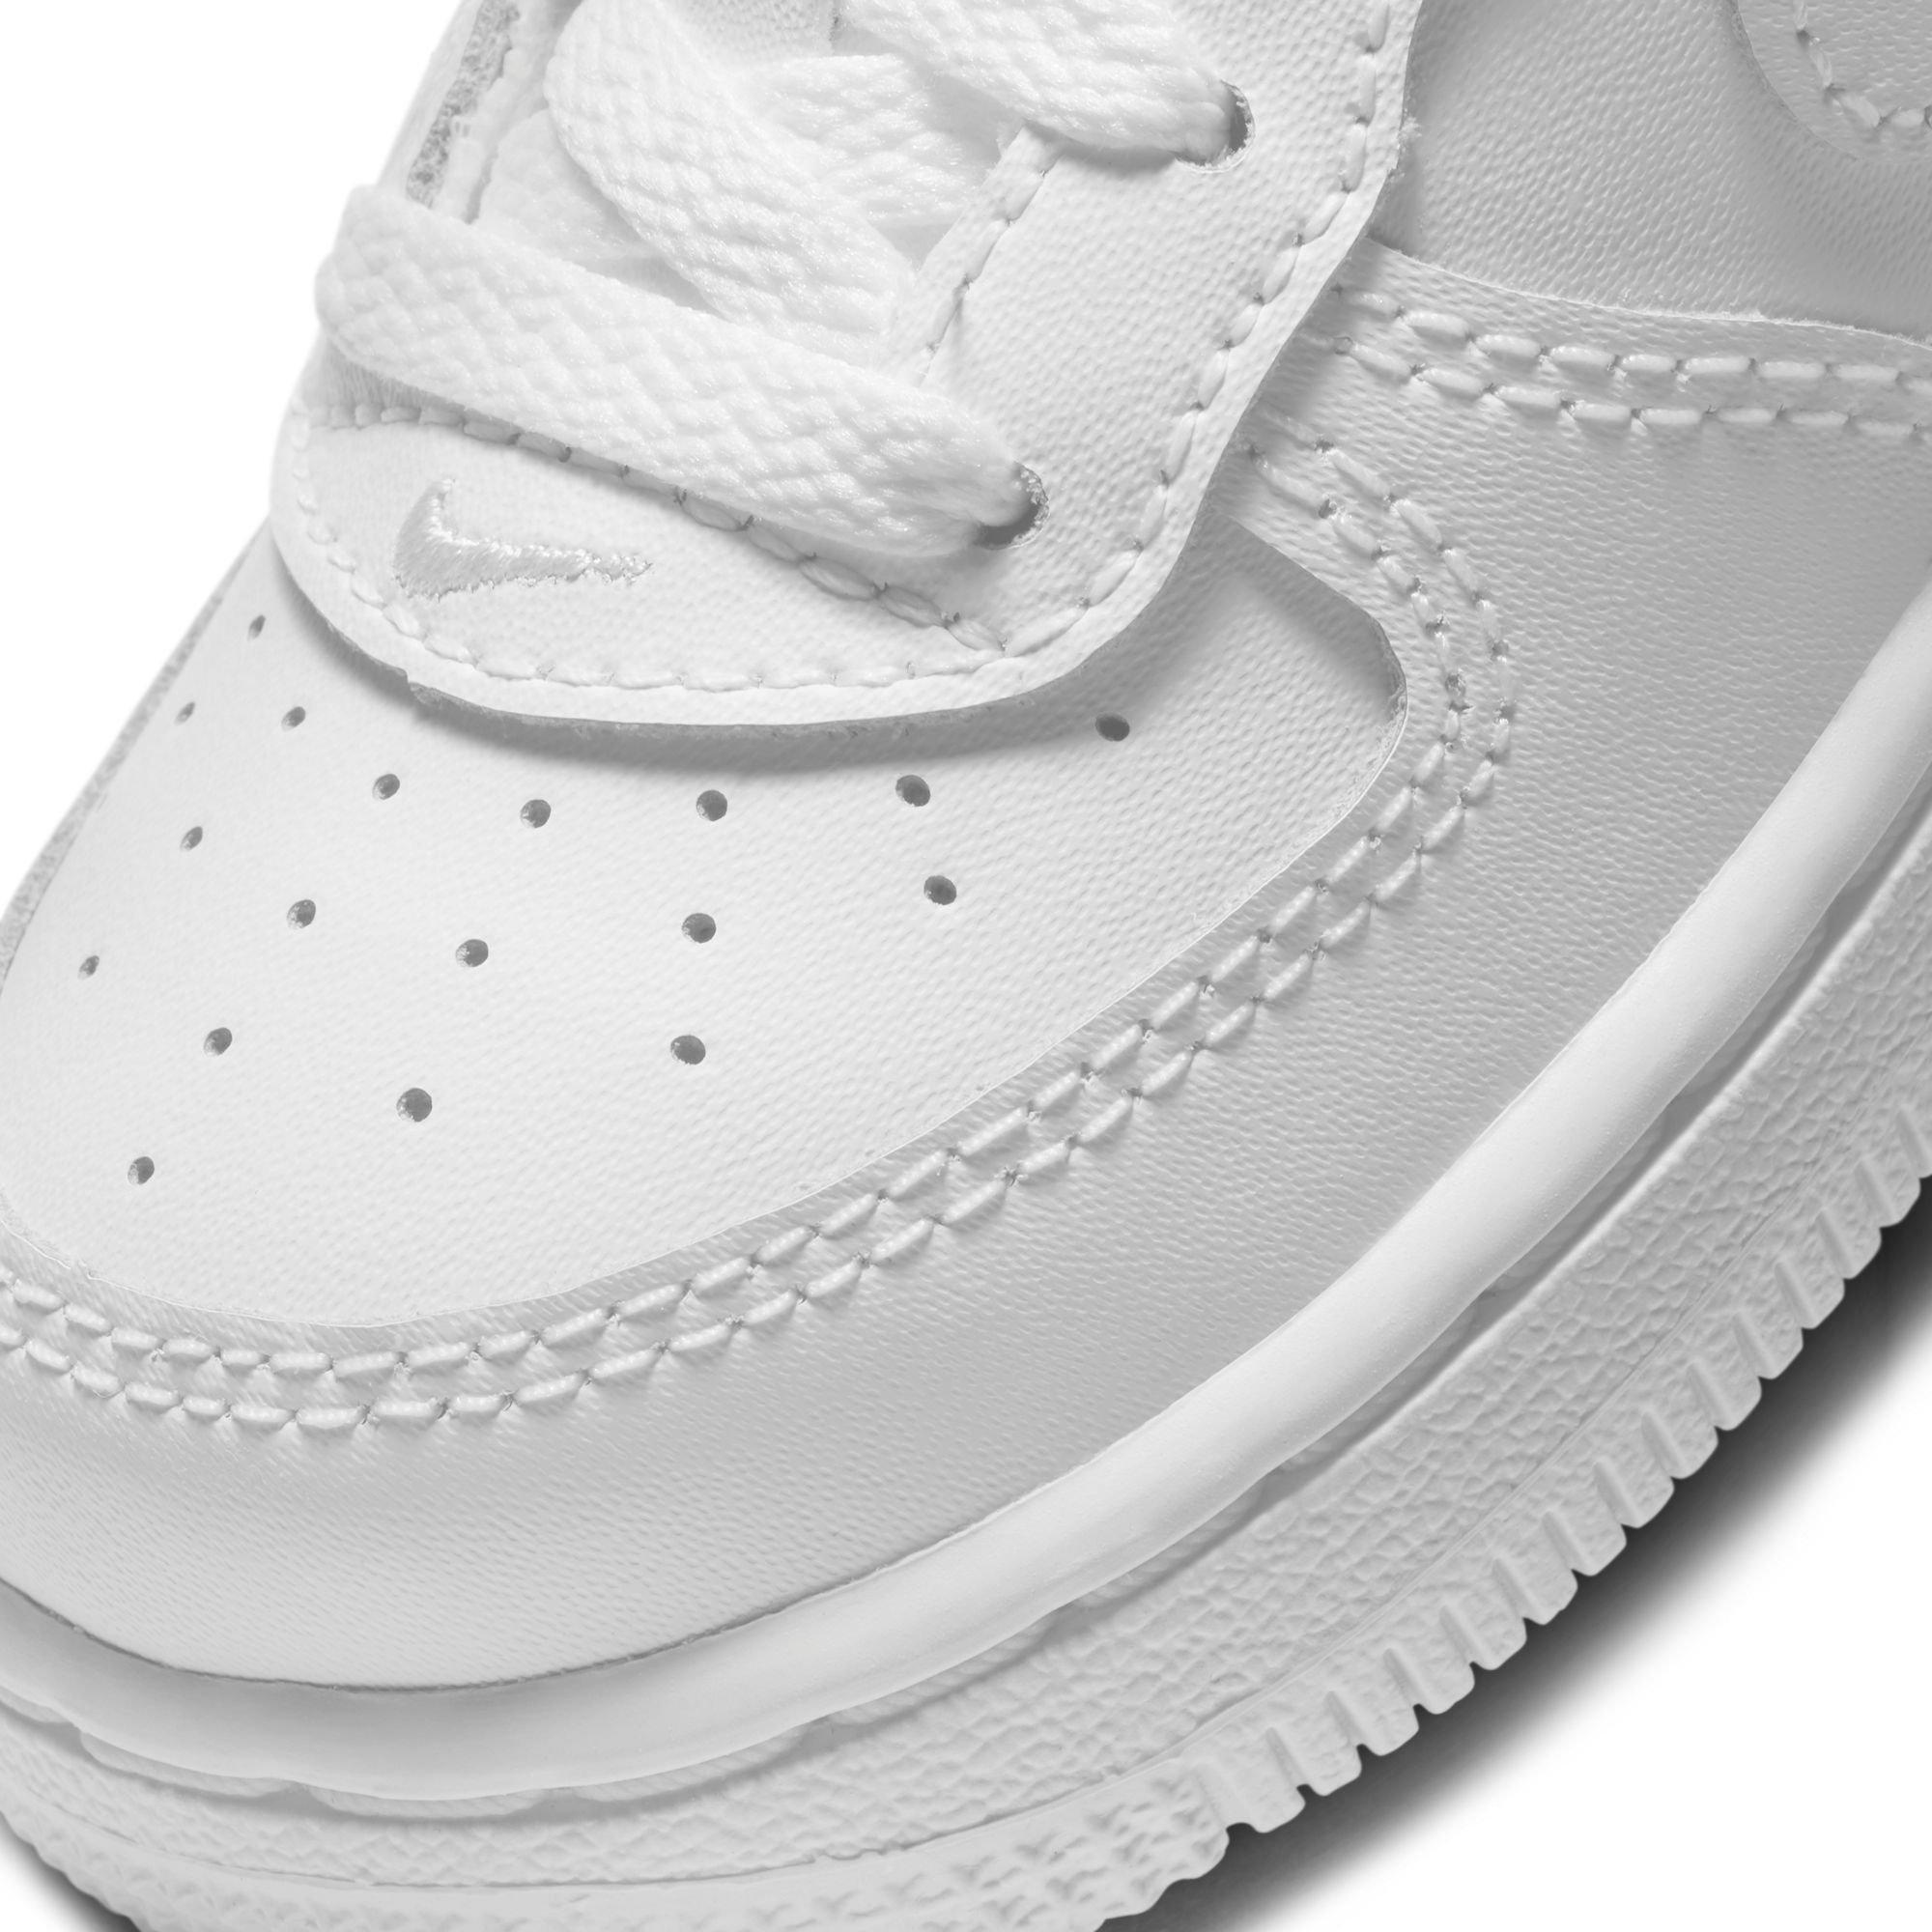 NWB Nike Air Force 1 LV8 Toddler Girls White Leather W Yellow